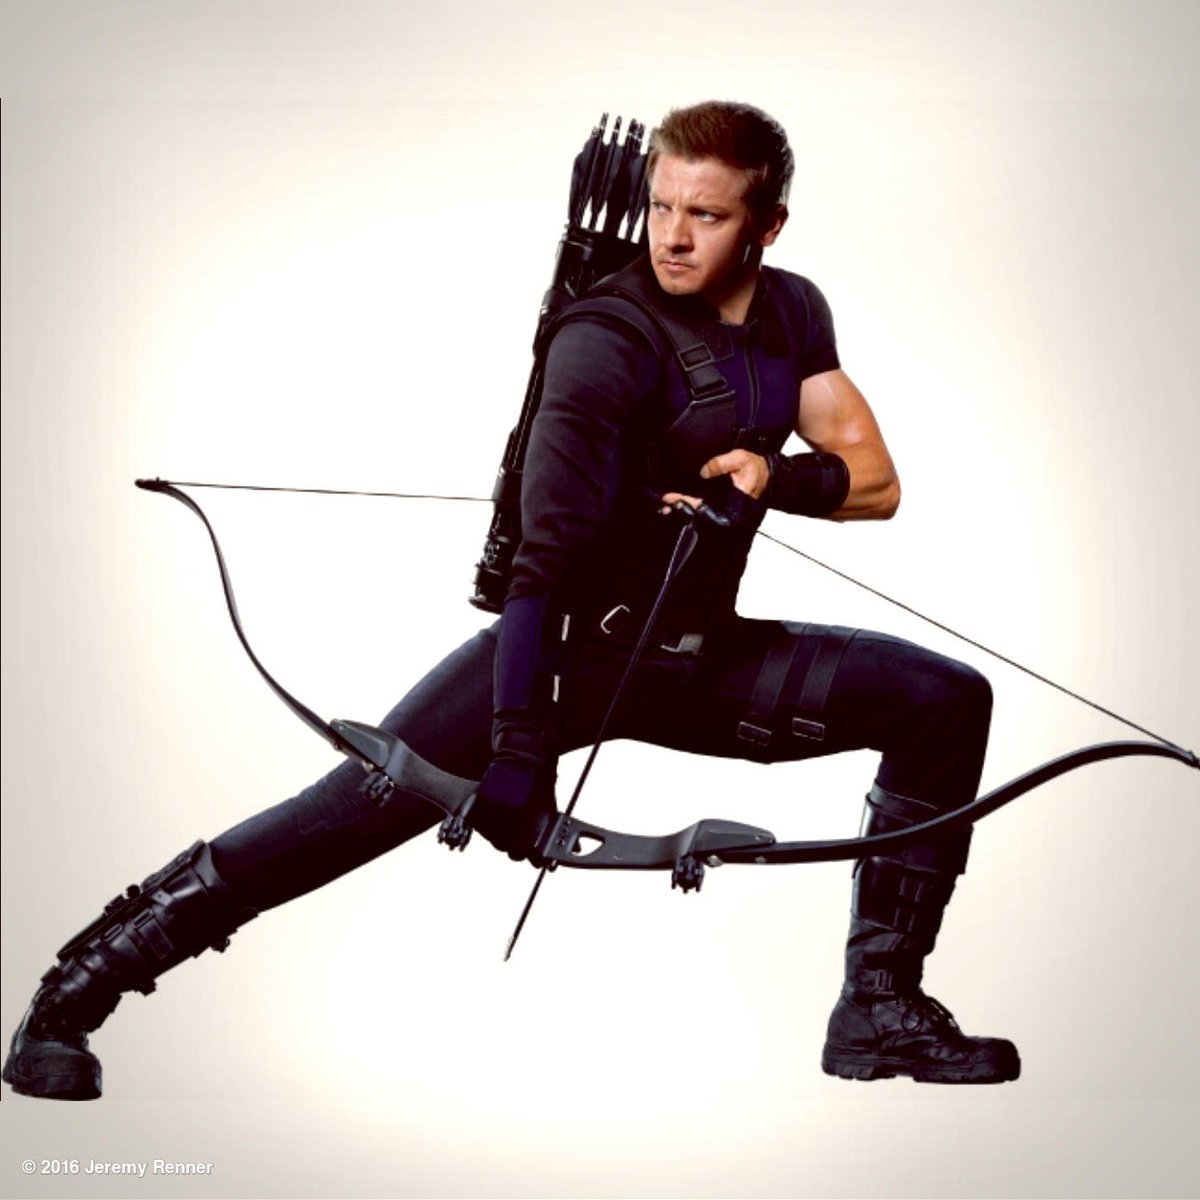 Promo images are coming out #newcostume  what do you think?  #getonmytip #marvel #hawkeye #civilwar #captainamerica https://t.co/YjLZs5ckUA